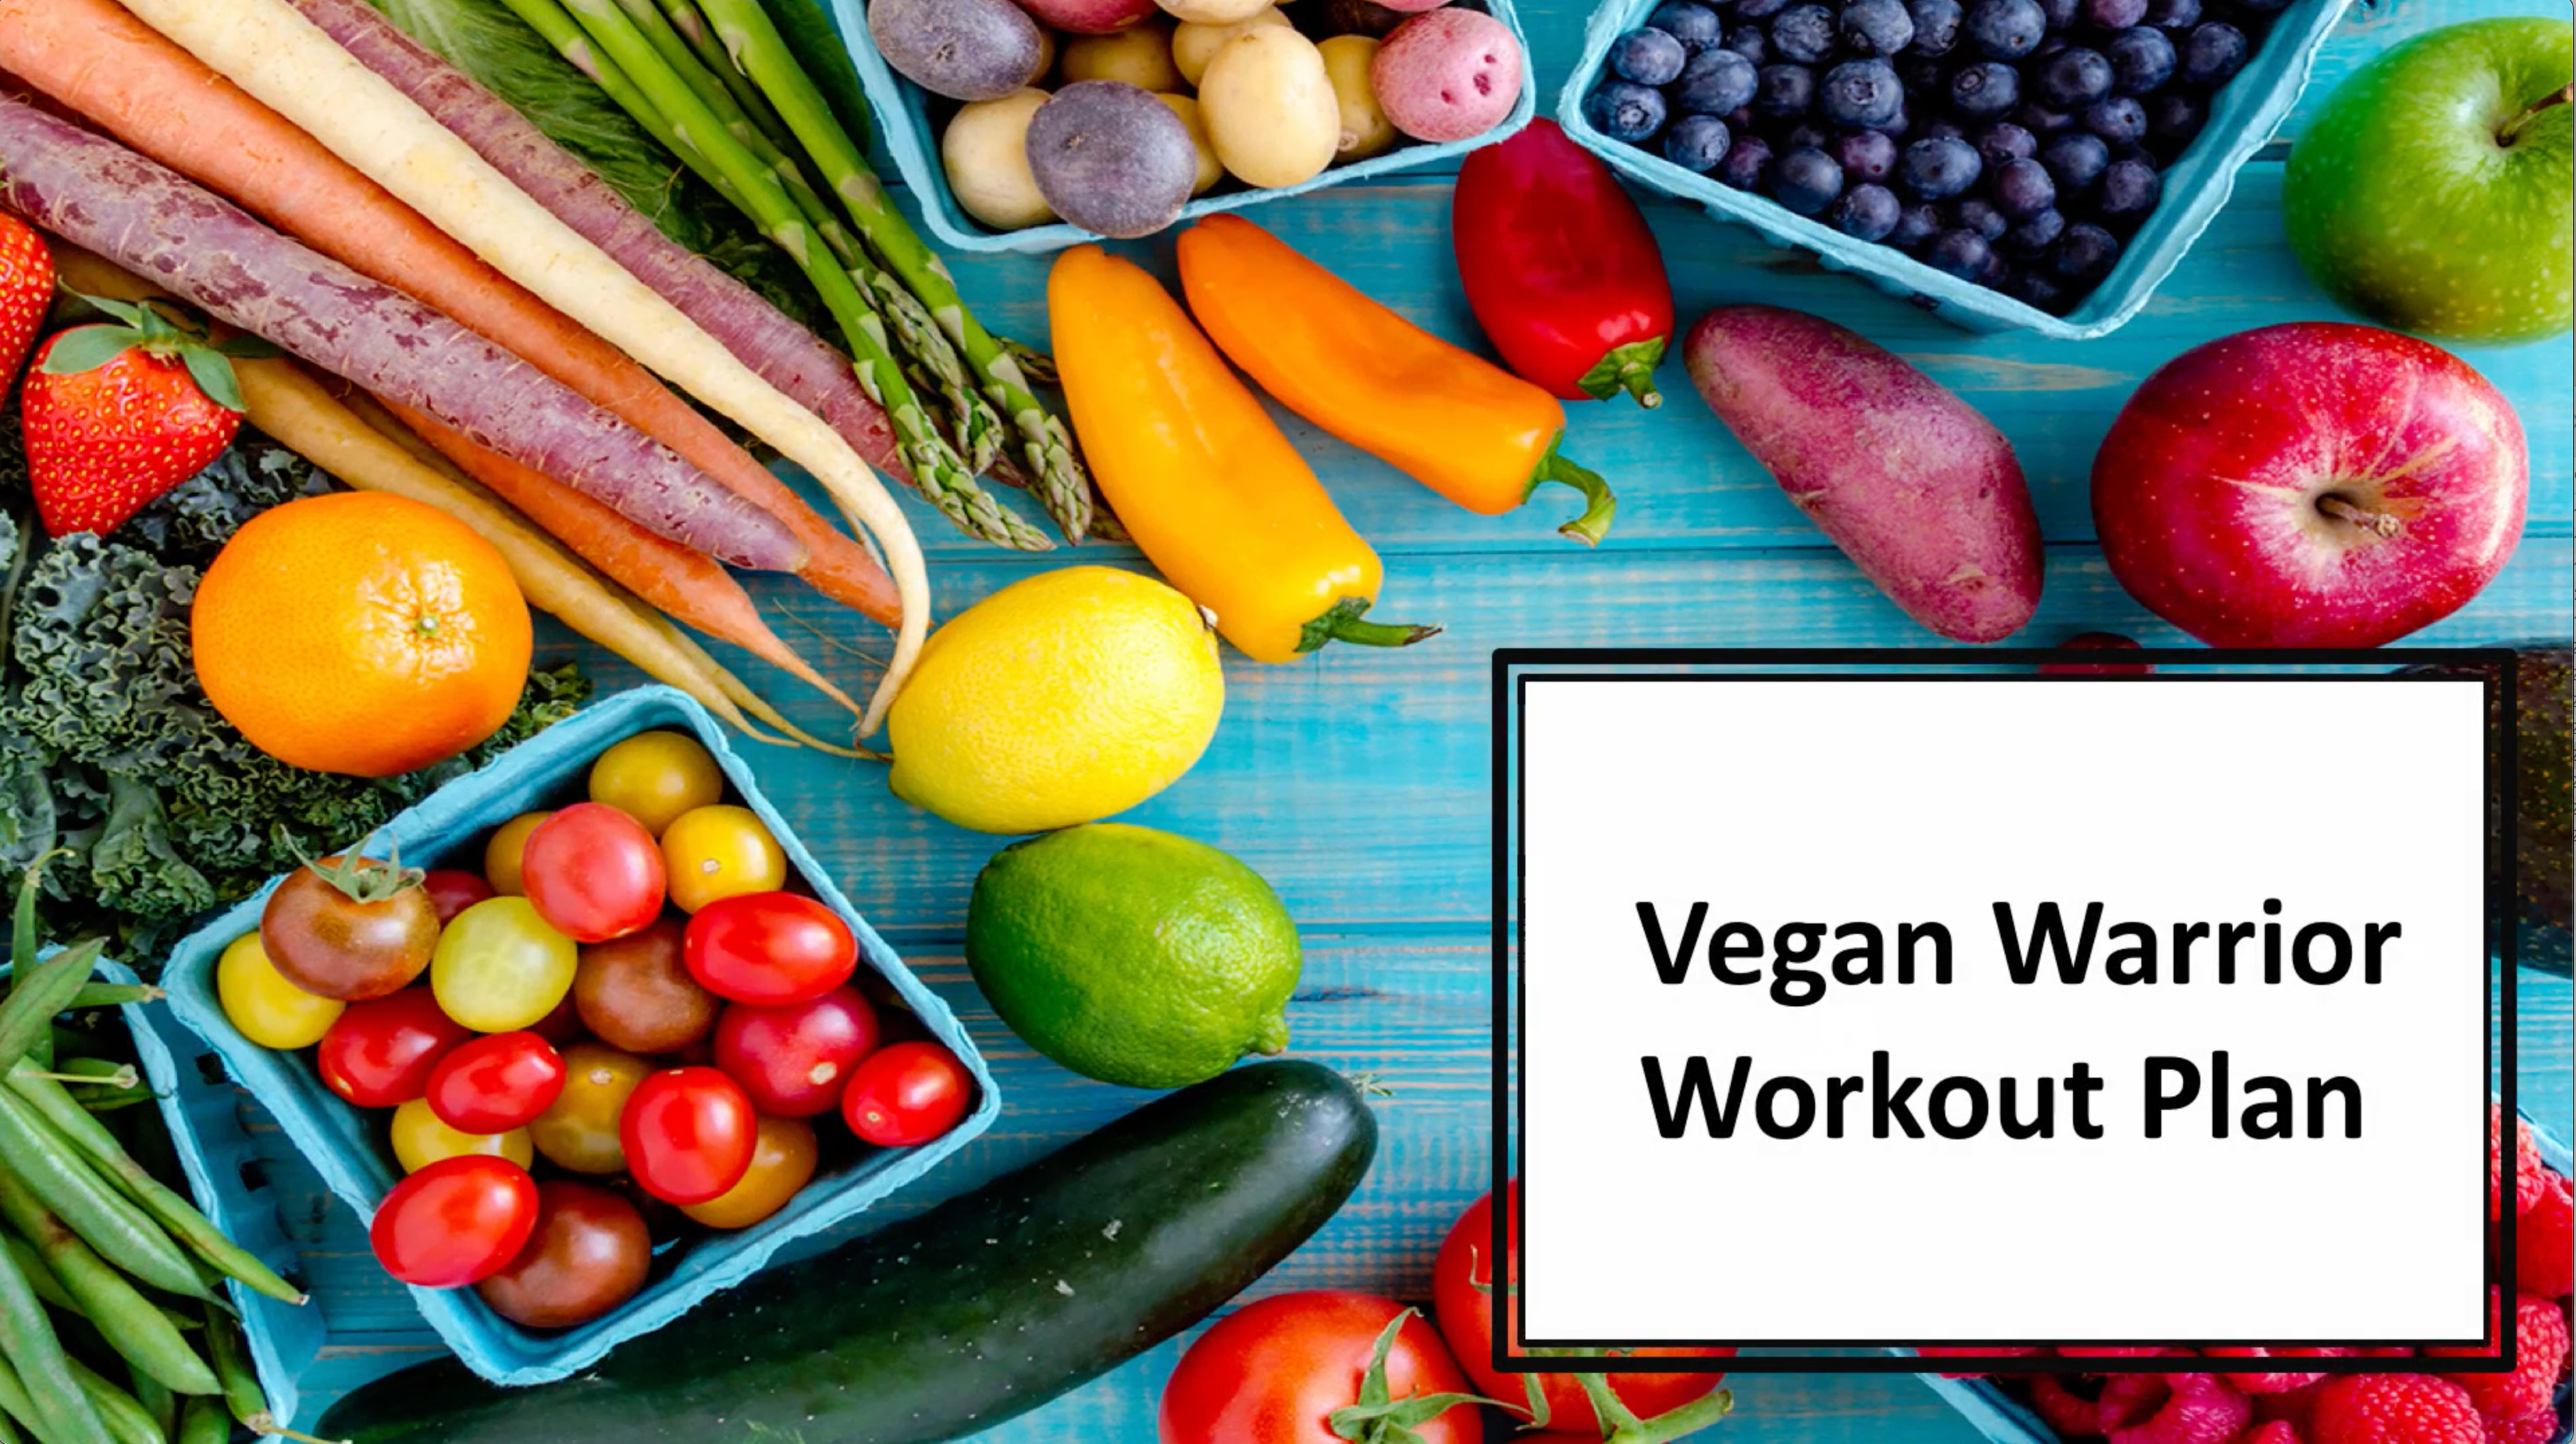 Load video: Vegan video course chapter 5 talks about the vegan warrior workout plan